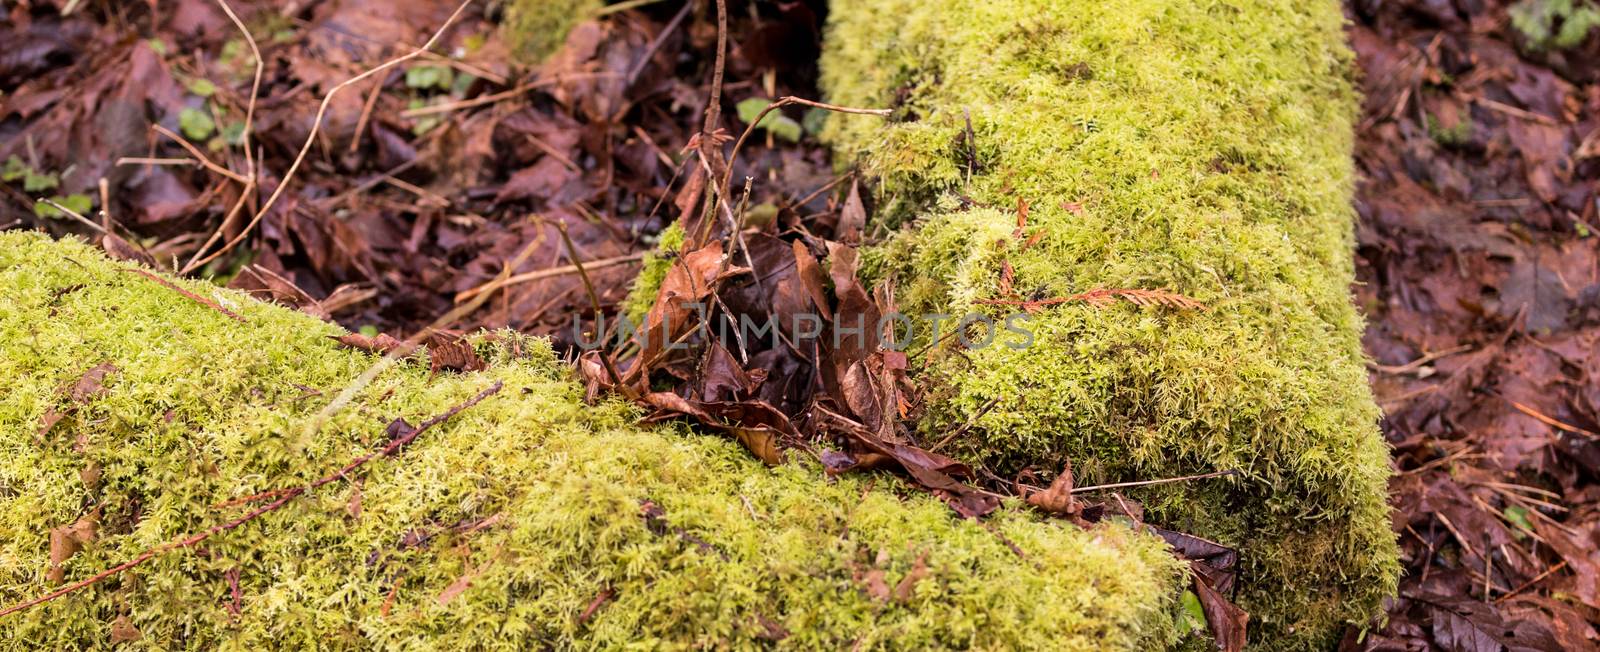 Moss covered fallen logs with brown decaying fallen leaves surrounding